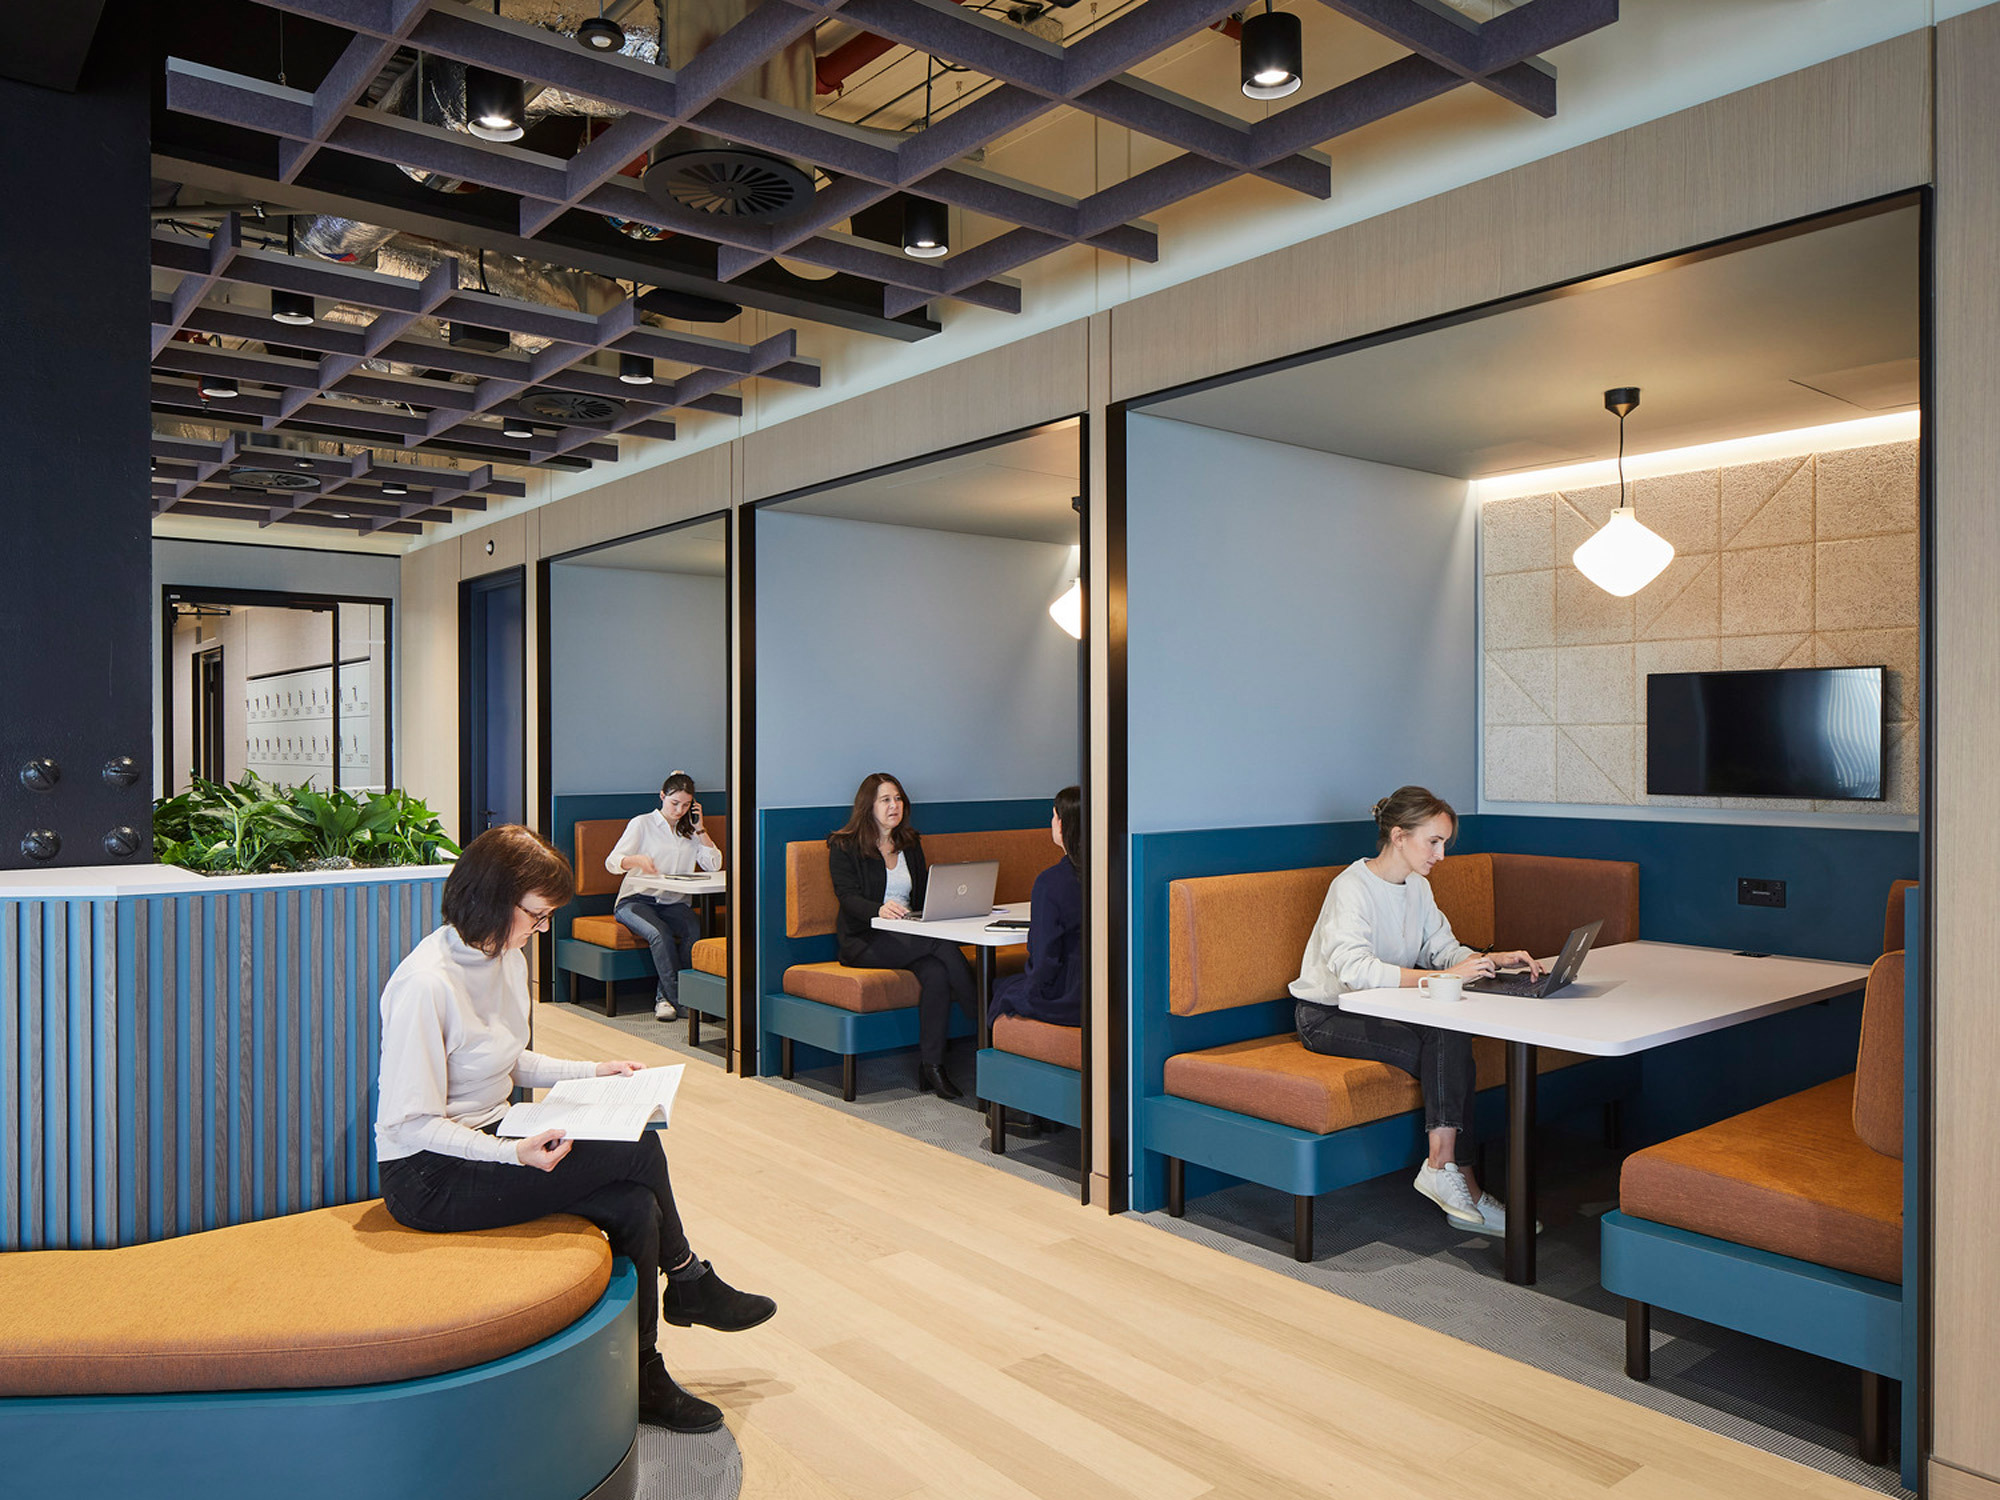 Modern office space featuring private blue and terracotta booths with integrated seating and tables, set against paneled walls. Overhead, an exposed ceiling adds an industrial touch, complemented by warm pendant lighting, providing functionality and aesthetic appeal for collaborative work environments.